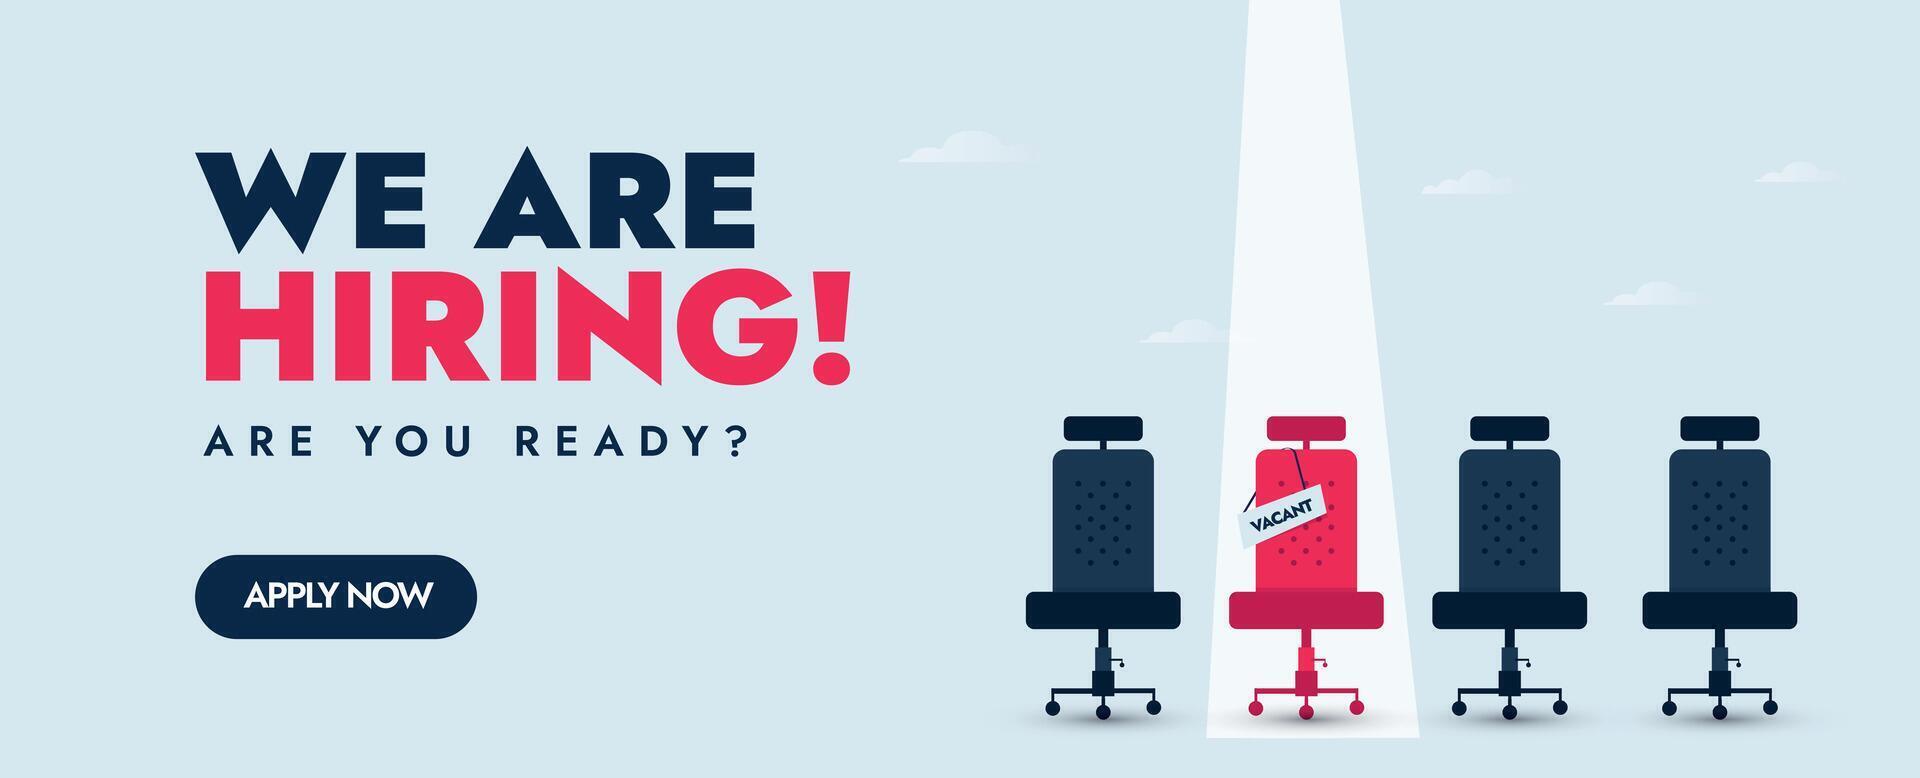 We are hiring cover banner. We are hiring announcement cover banner with four empty office chairs having a vacant sign on pink chair. Hiring cover banner concept for recruiter. Recruitment cover vector